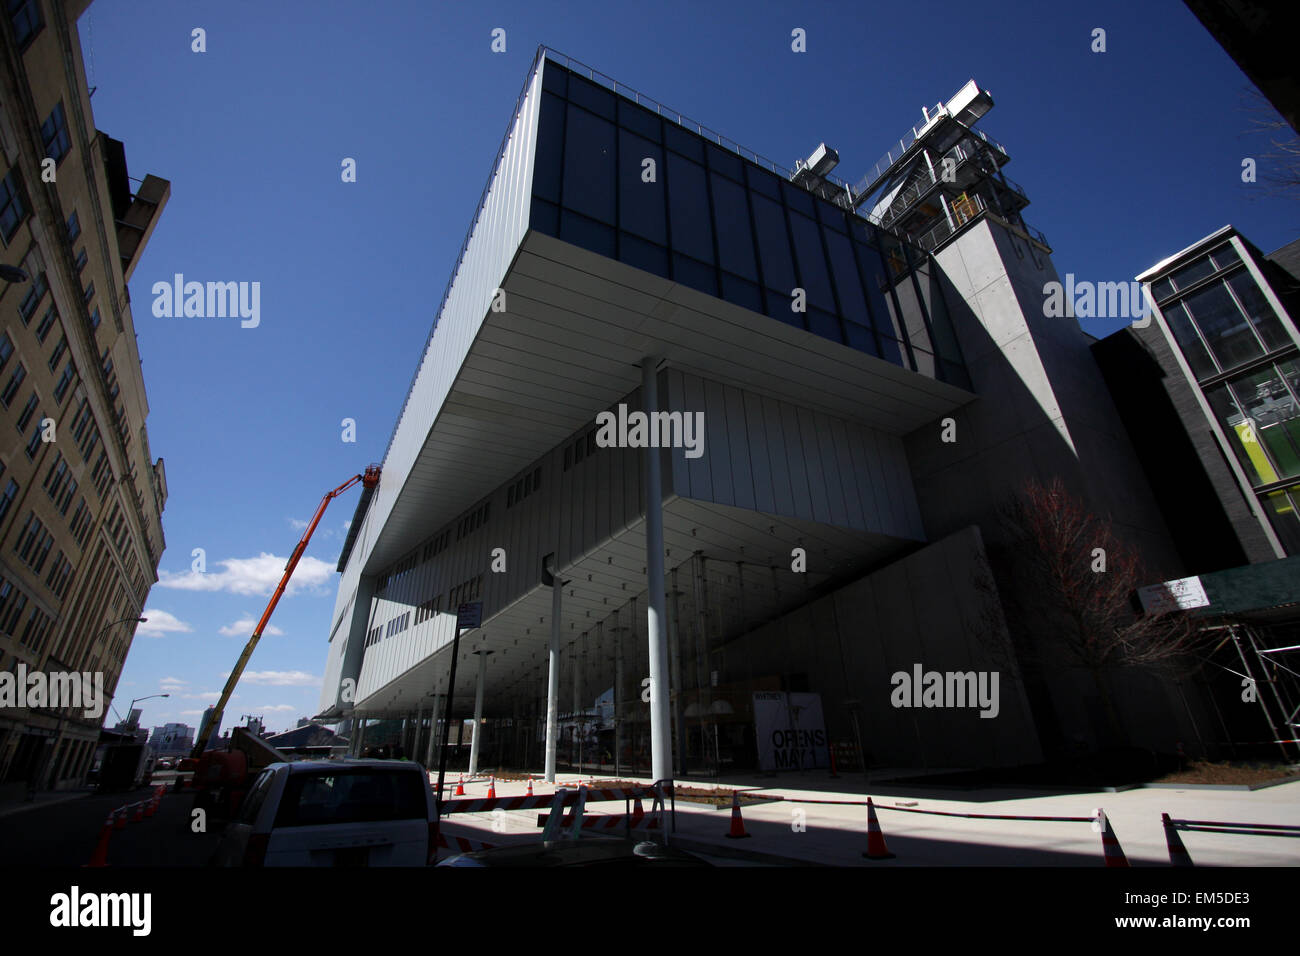 New York, USA. 15th Apr, 2015. Construction workers putting finishing touches on the new Whitney Museum of American Art building at Washington Street and Gansevoort Street, in New York City's Meatpacking District at the end of the High Line.   Designed by architect Renzo Piano, the 200,000-square-foot space will open to the public on May 1st, 2015       London 2012  - Olympics:   Swimming Practice        London 2012  - Olympics:  Diving Practice.        London 2012  - Olympics:  Swimming Practice. Credit:  Adam Stoltman/Alamy Live News Stock Photo